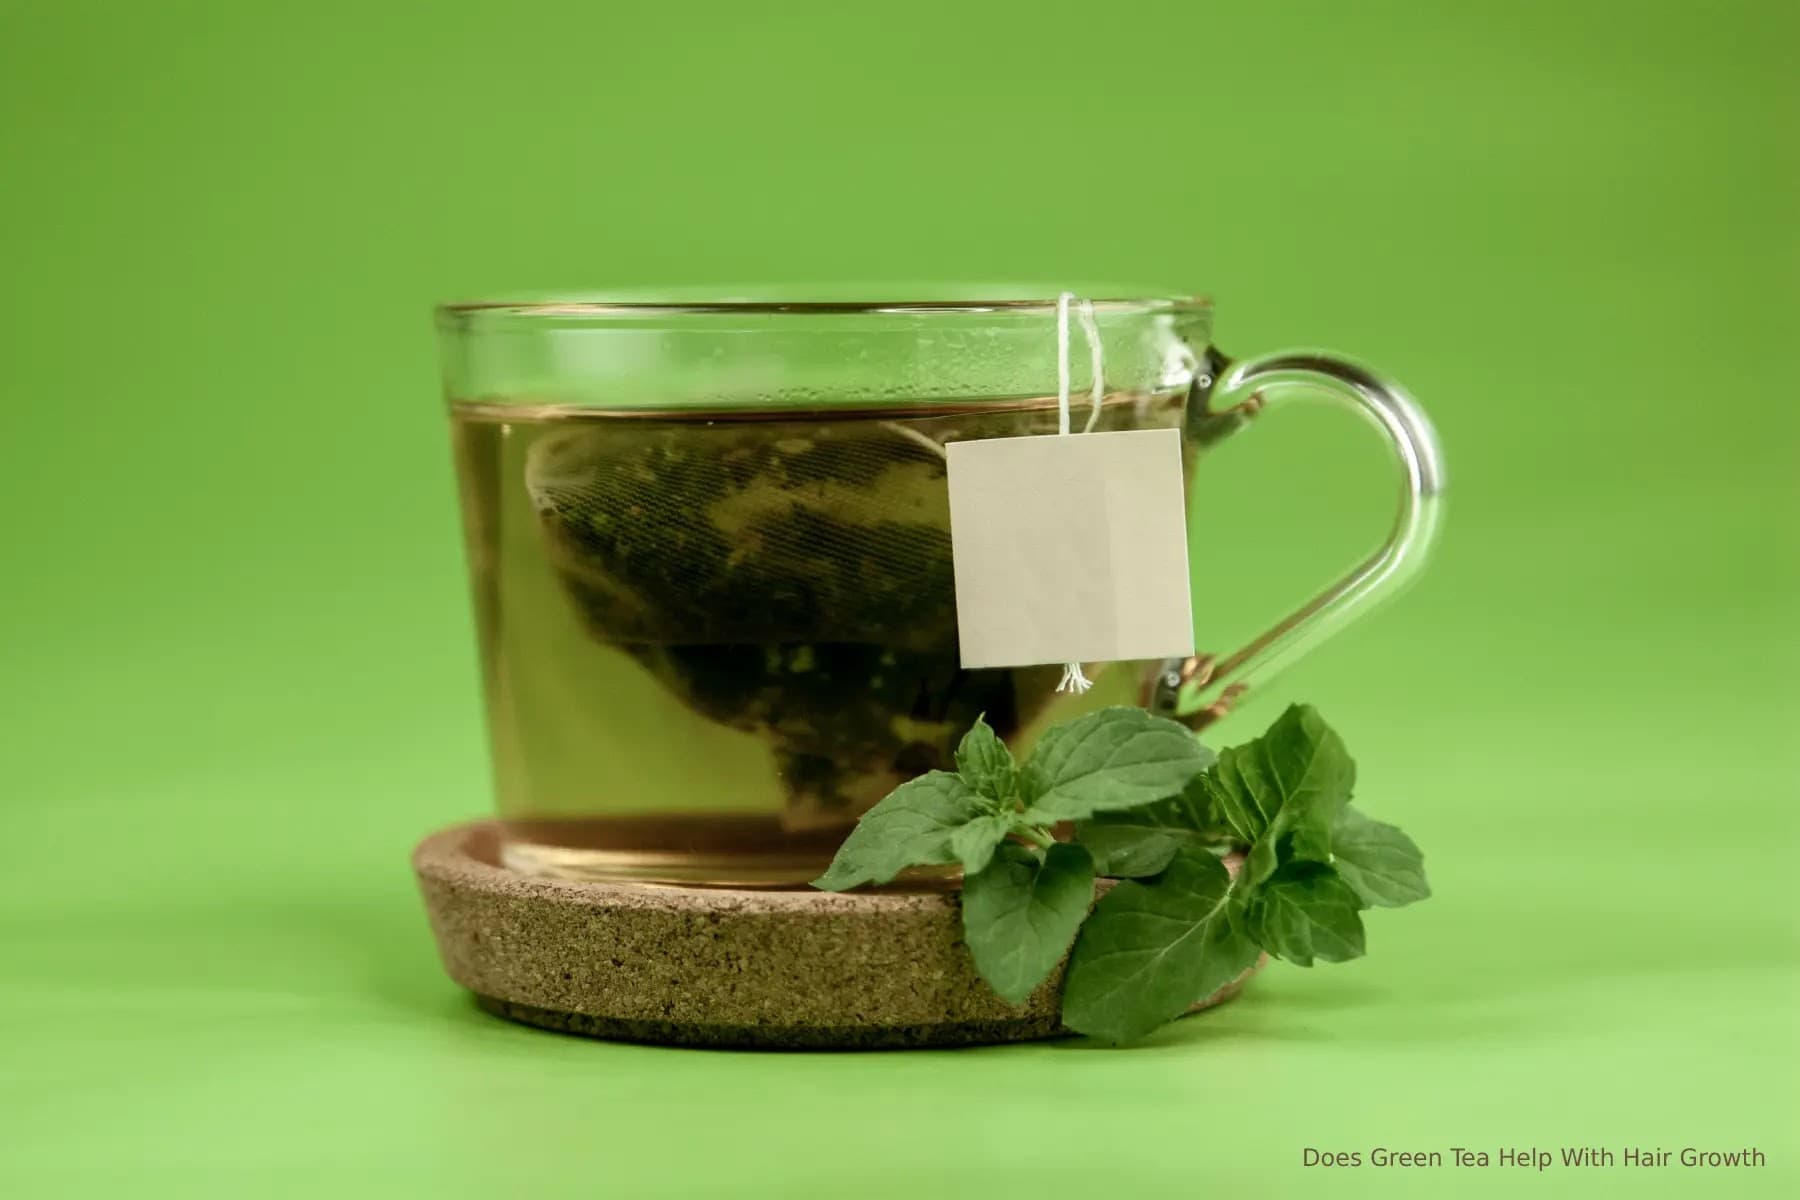 Does Green Tea Help With Hair Growth? | Bald Free